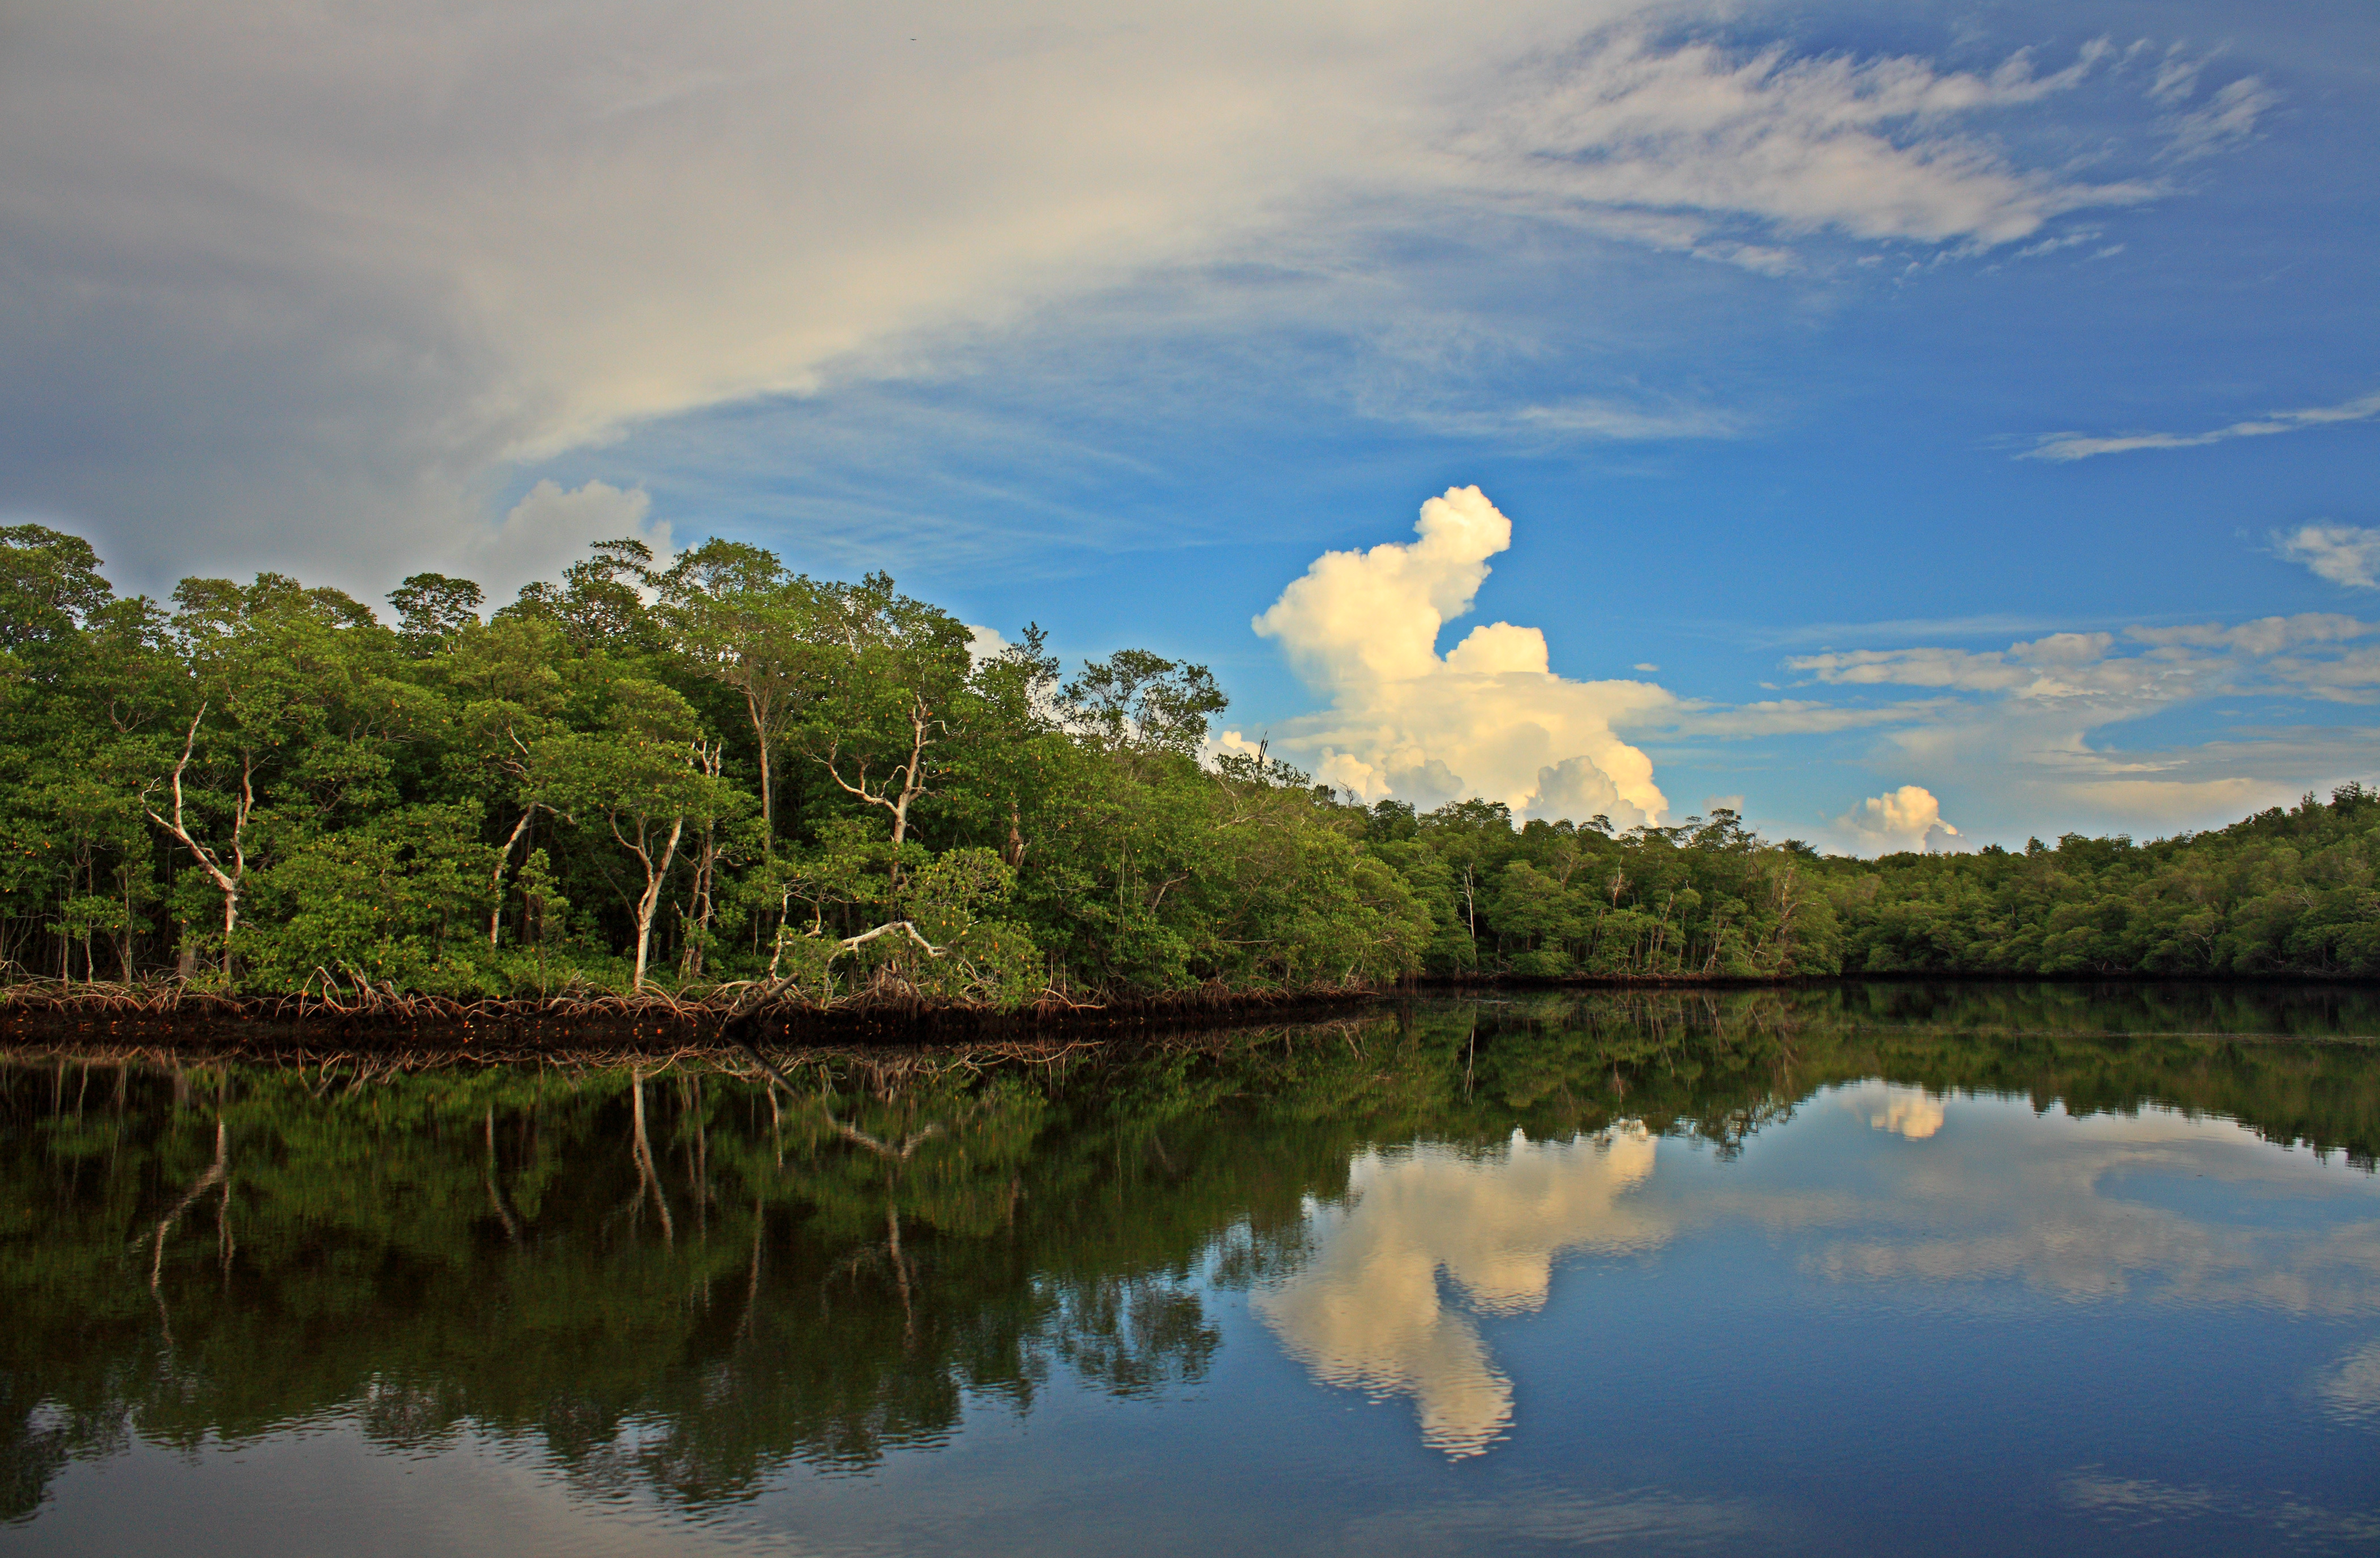 Calm wetland waters reflect the sky and vegetation in the Everglades